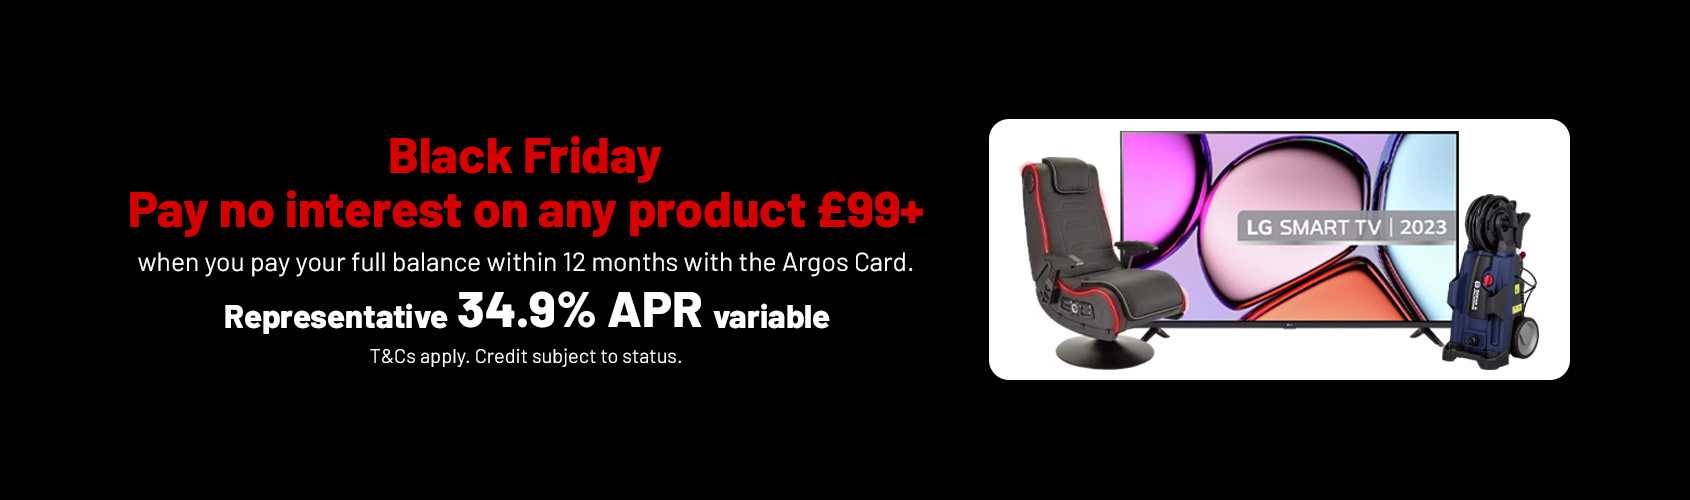 Black Friday. Pay no interest on any product £99+ when you pay your full balance within 12 months with the Argos Card. Representative 34.9% APR variable. T&Cs apply. Credit subject to status.